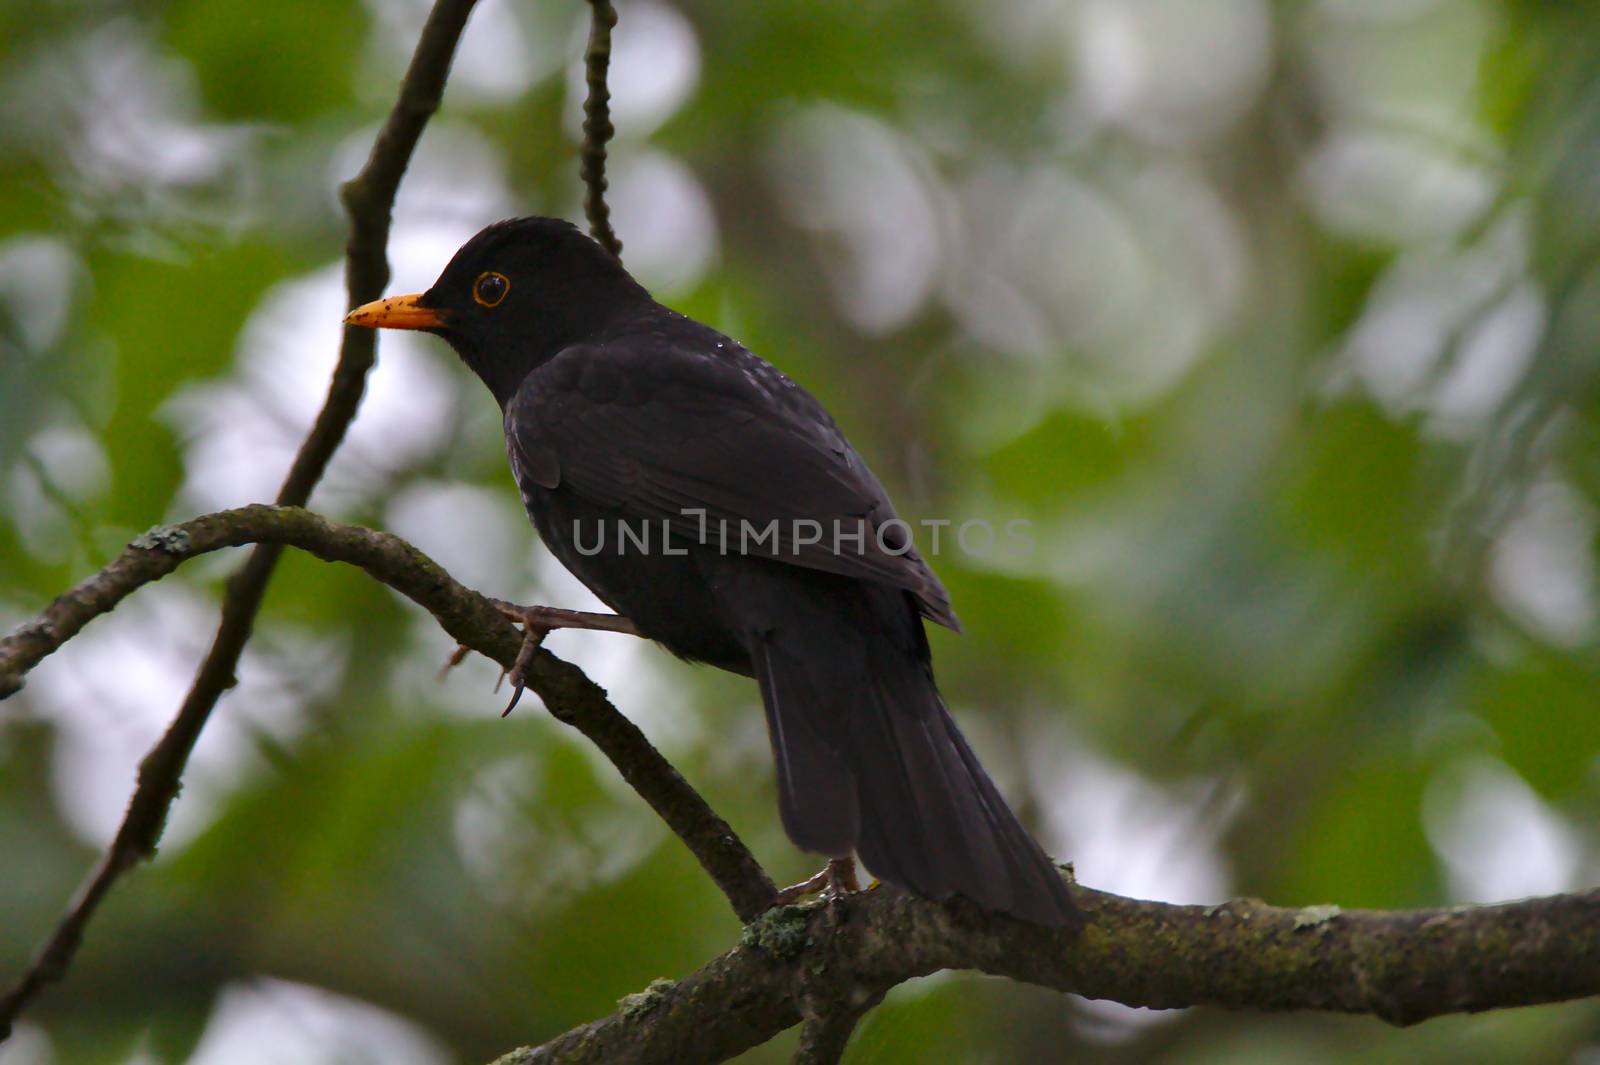 Black bird with amber beak and eyes sitting on the branch of a tree.